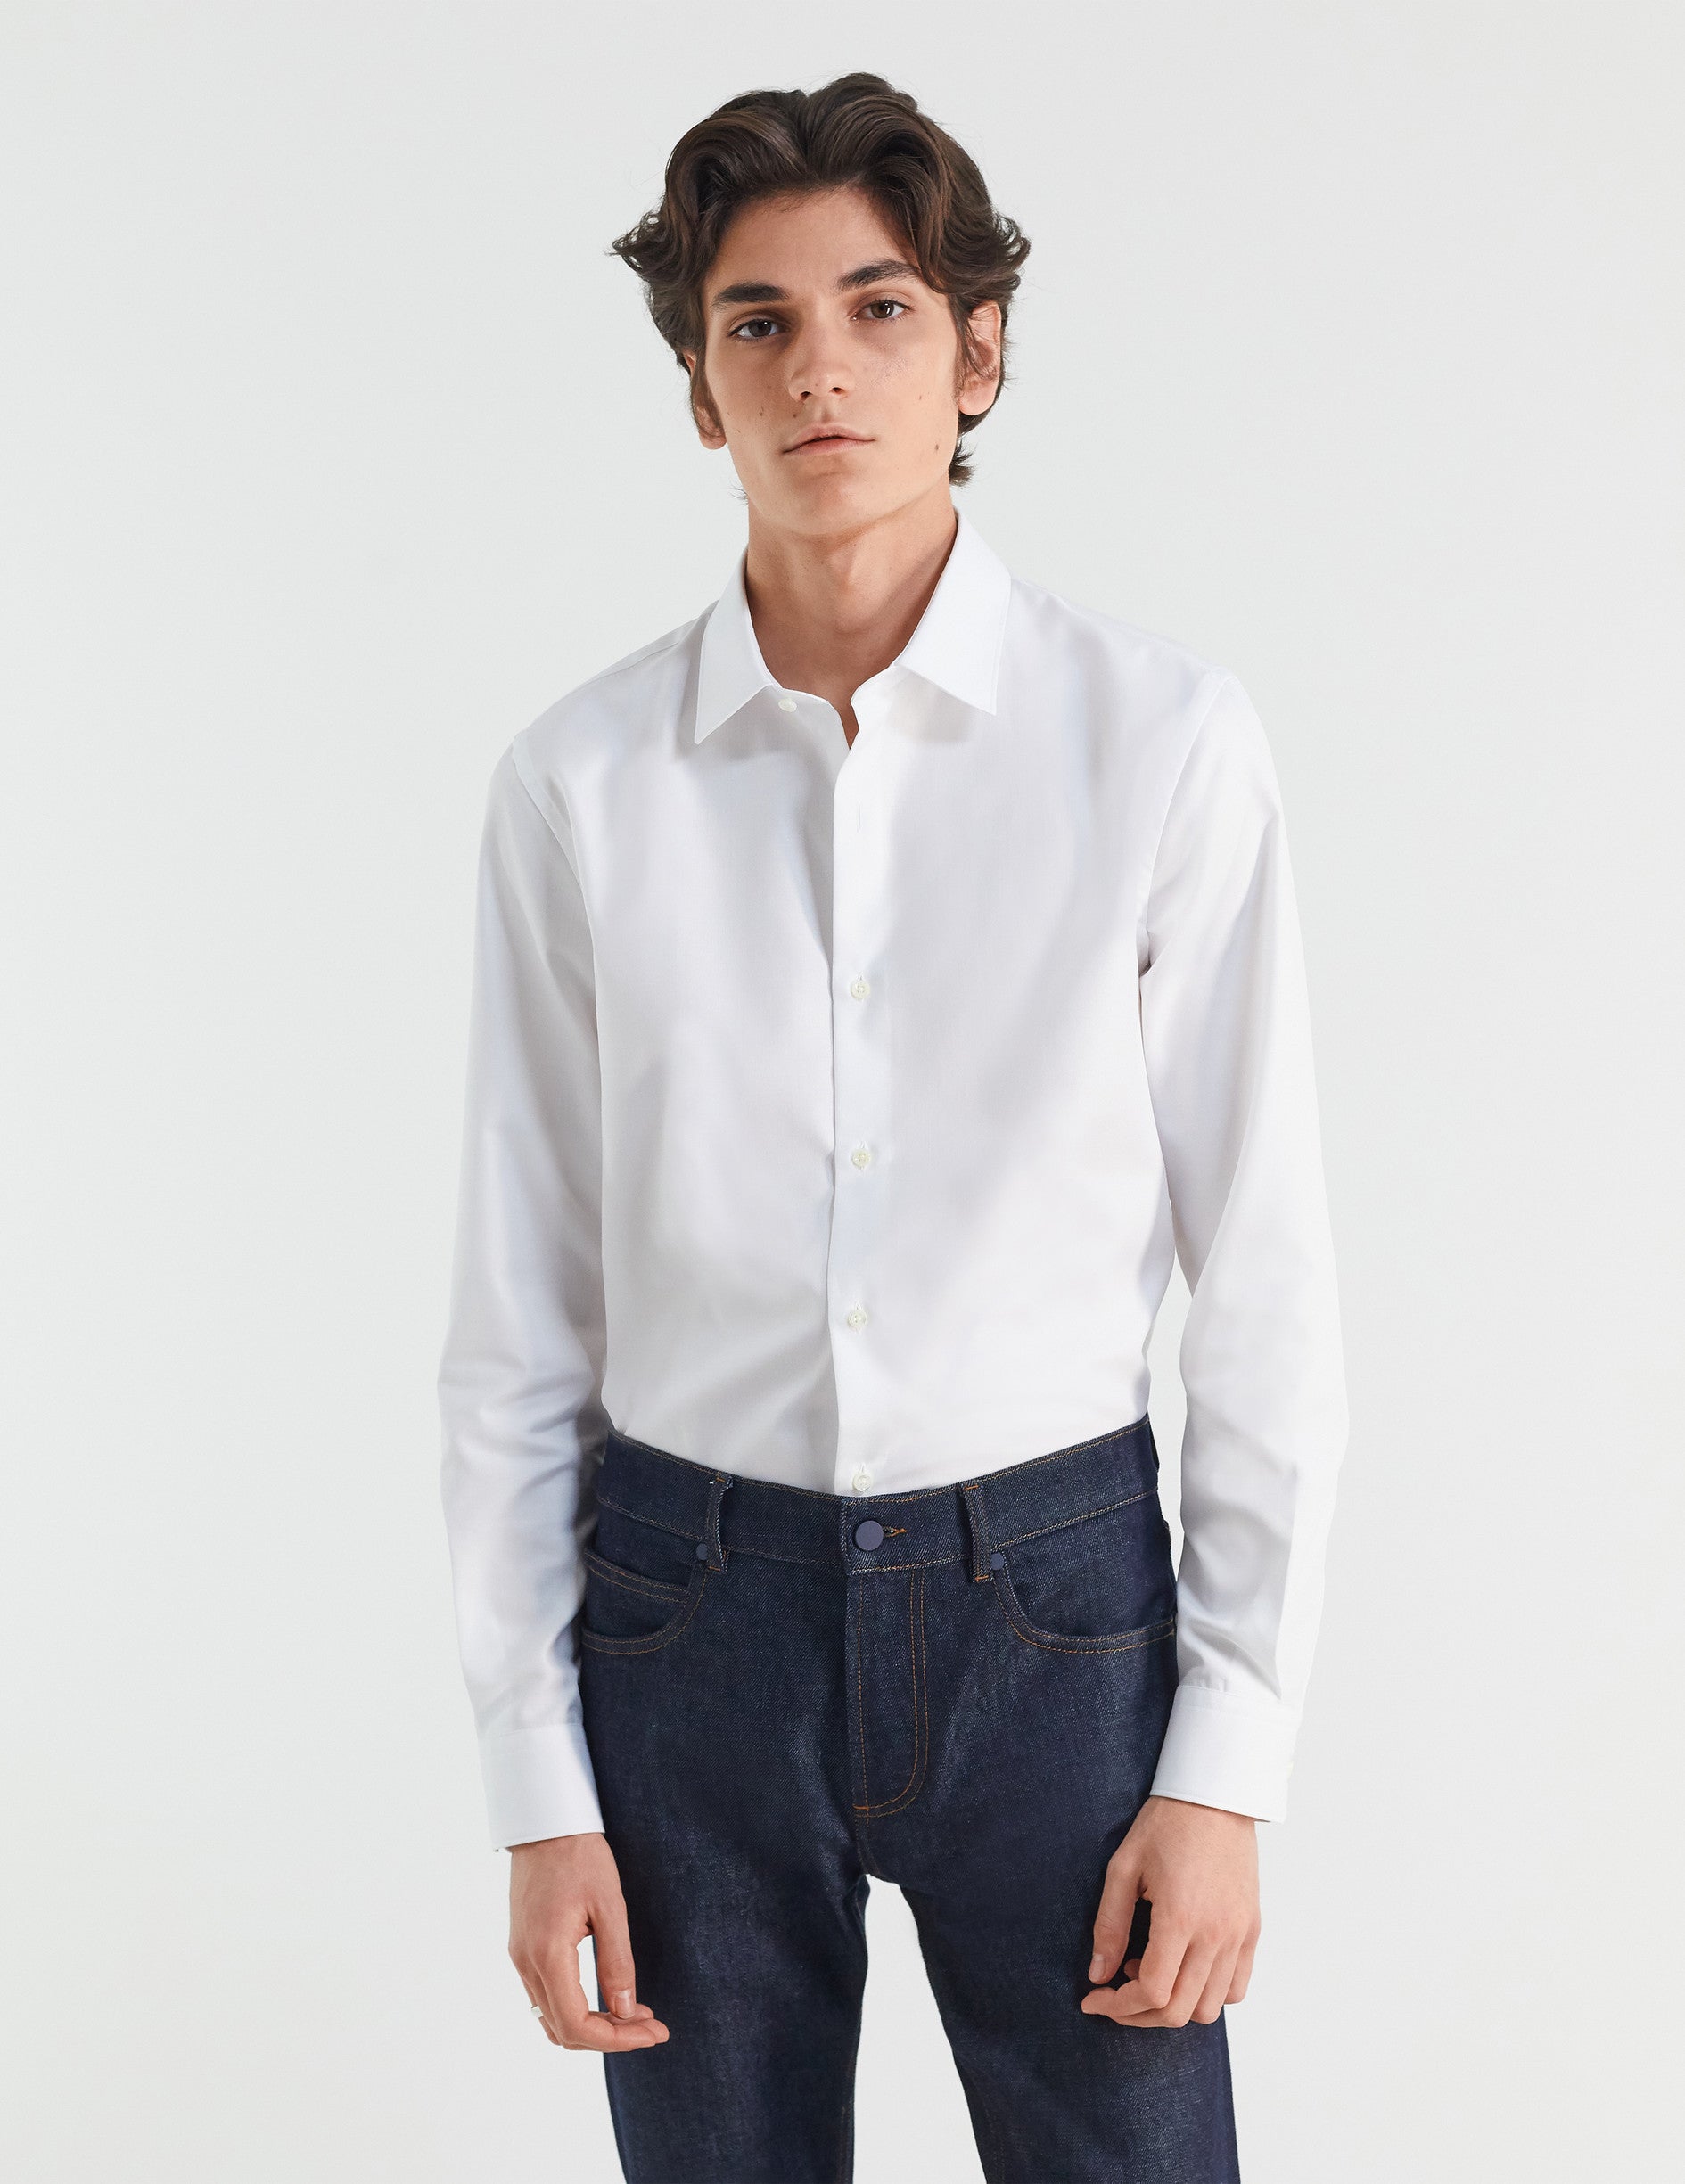 Fitted white shirt - fashioned - Figaret Collar